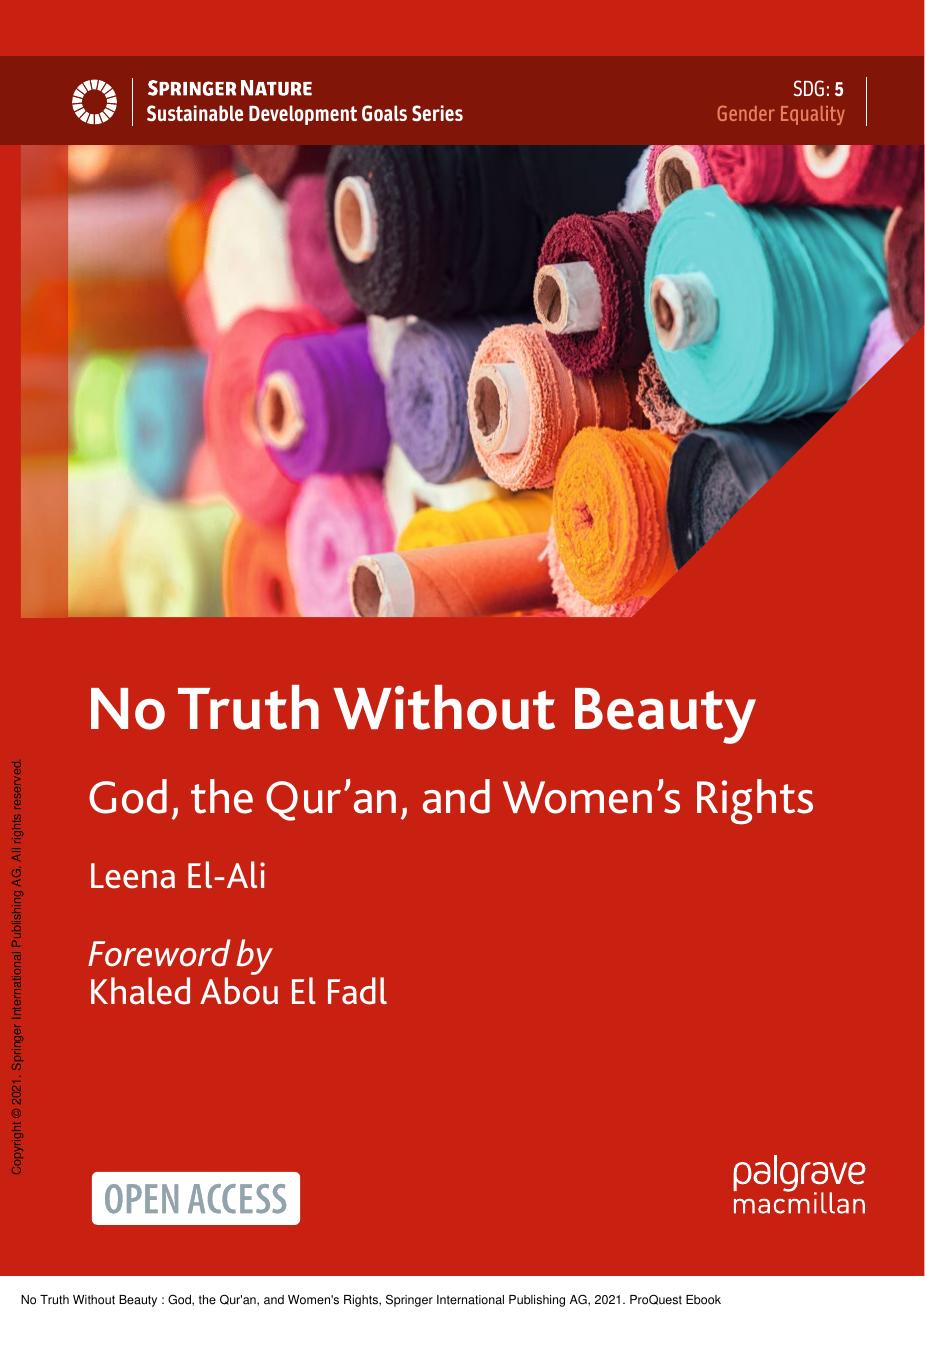 No Truth Without Beauty: God, the Qur'an, and Women's Rights by Leena El-Ali; Khaled Abou El Fadl